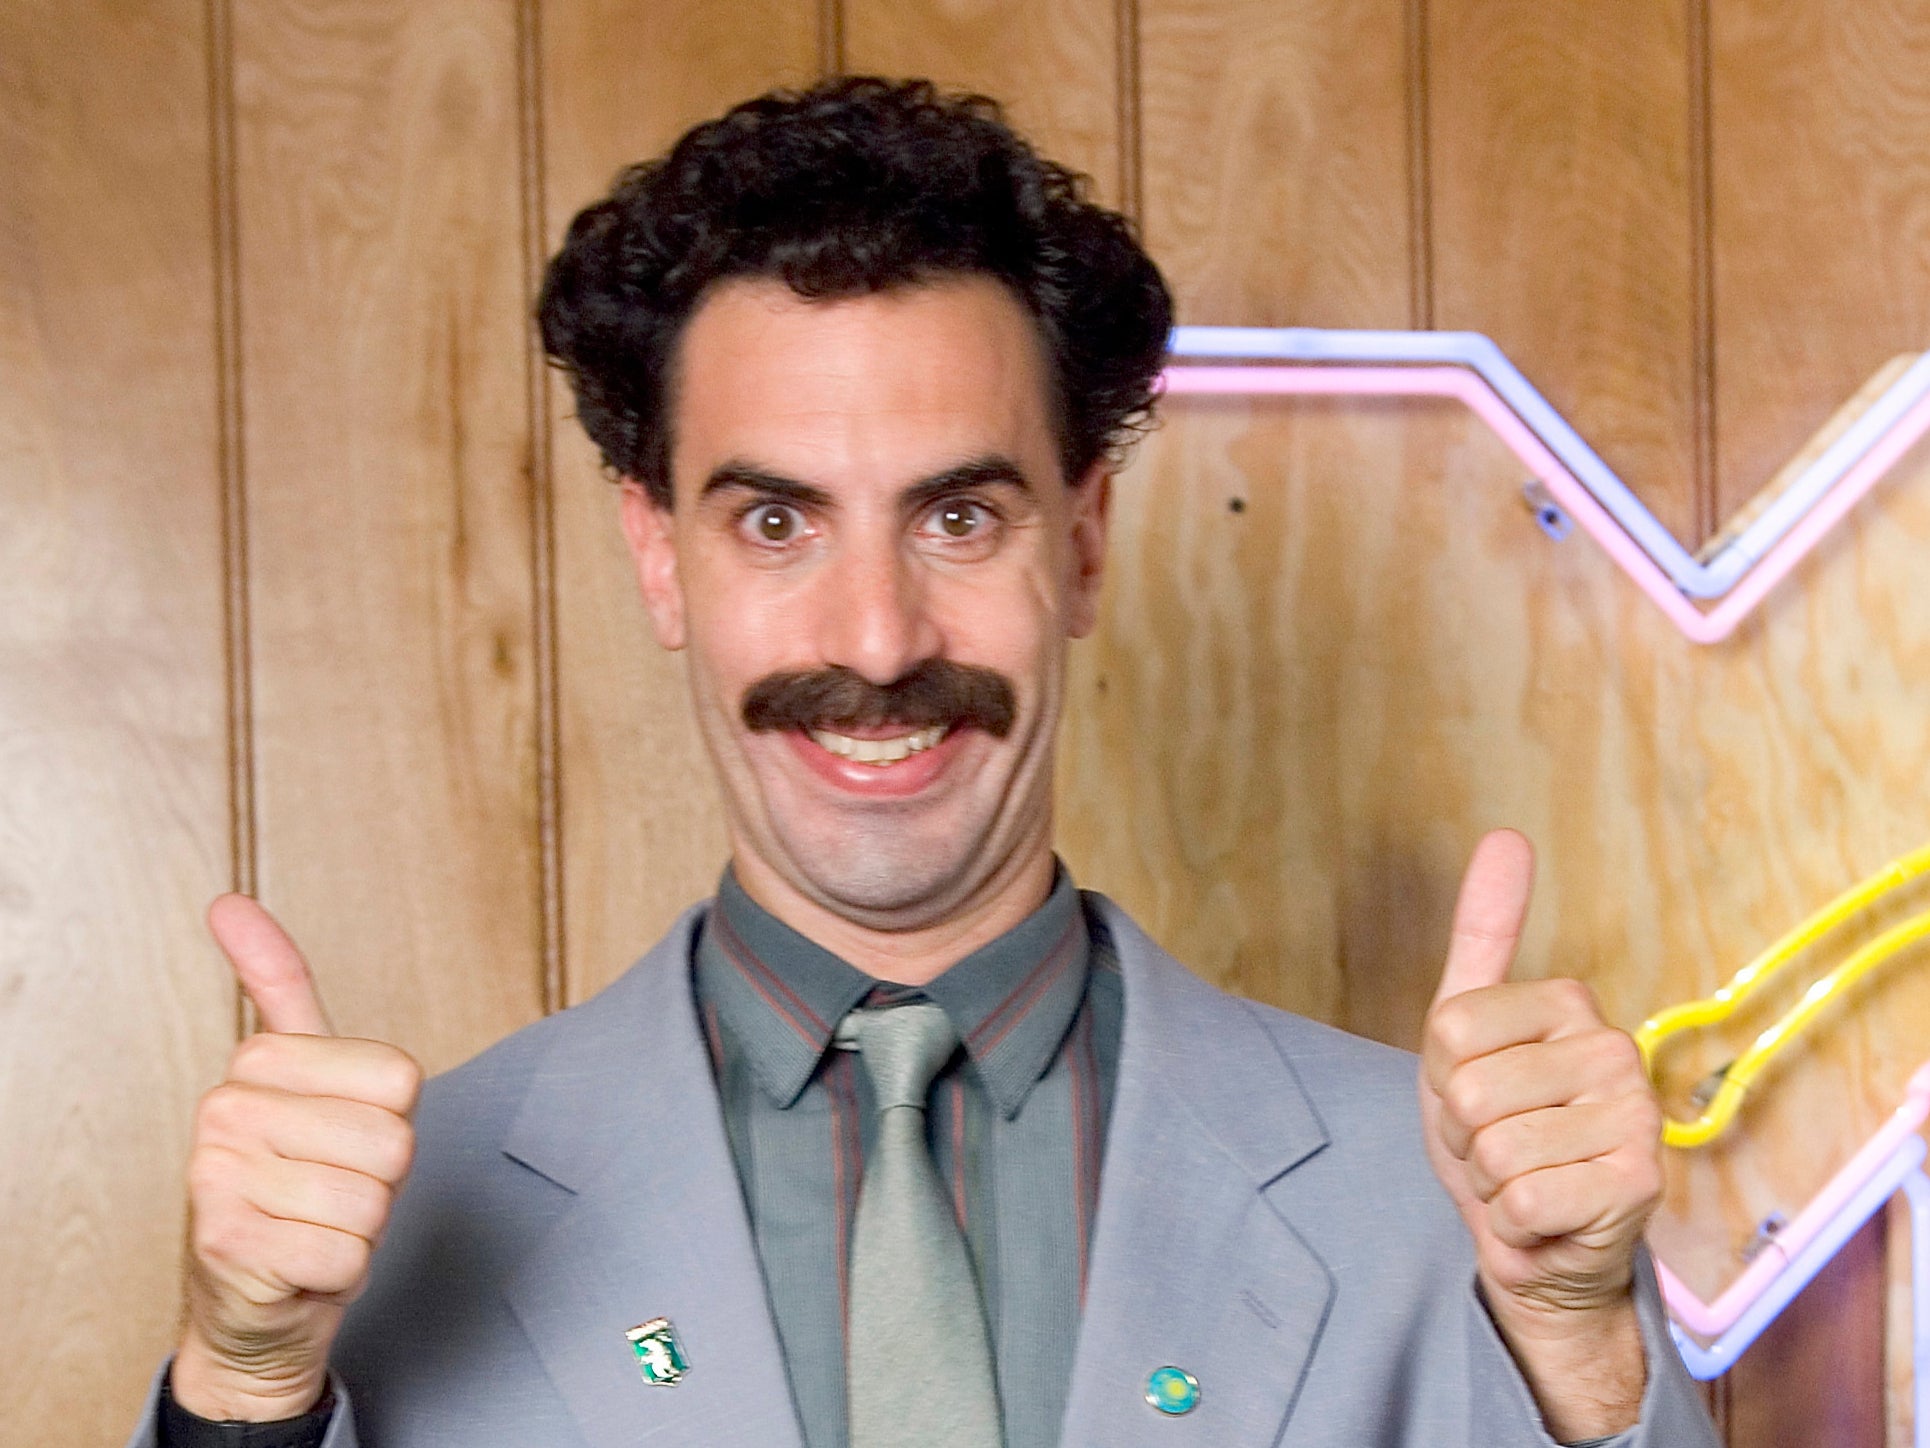 Borat will return for a new film released this November